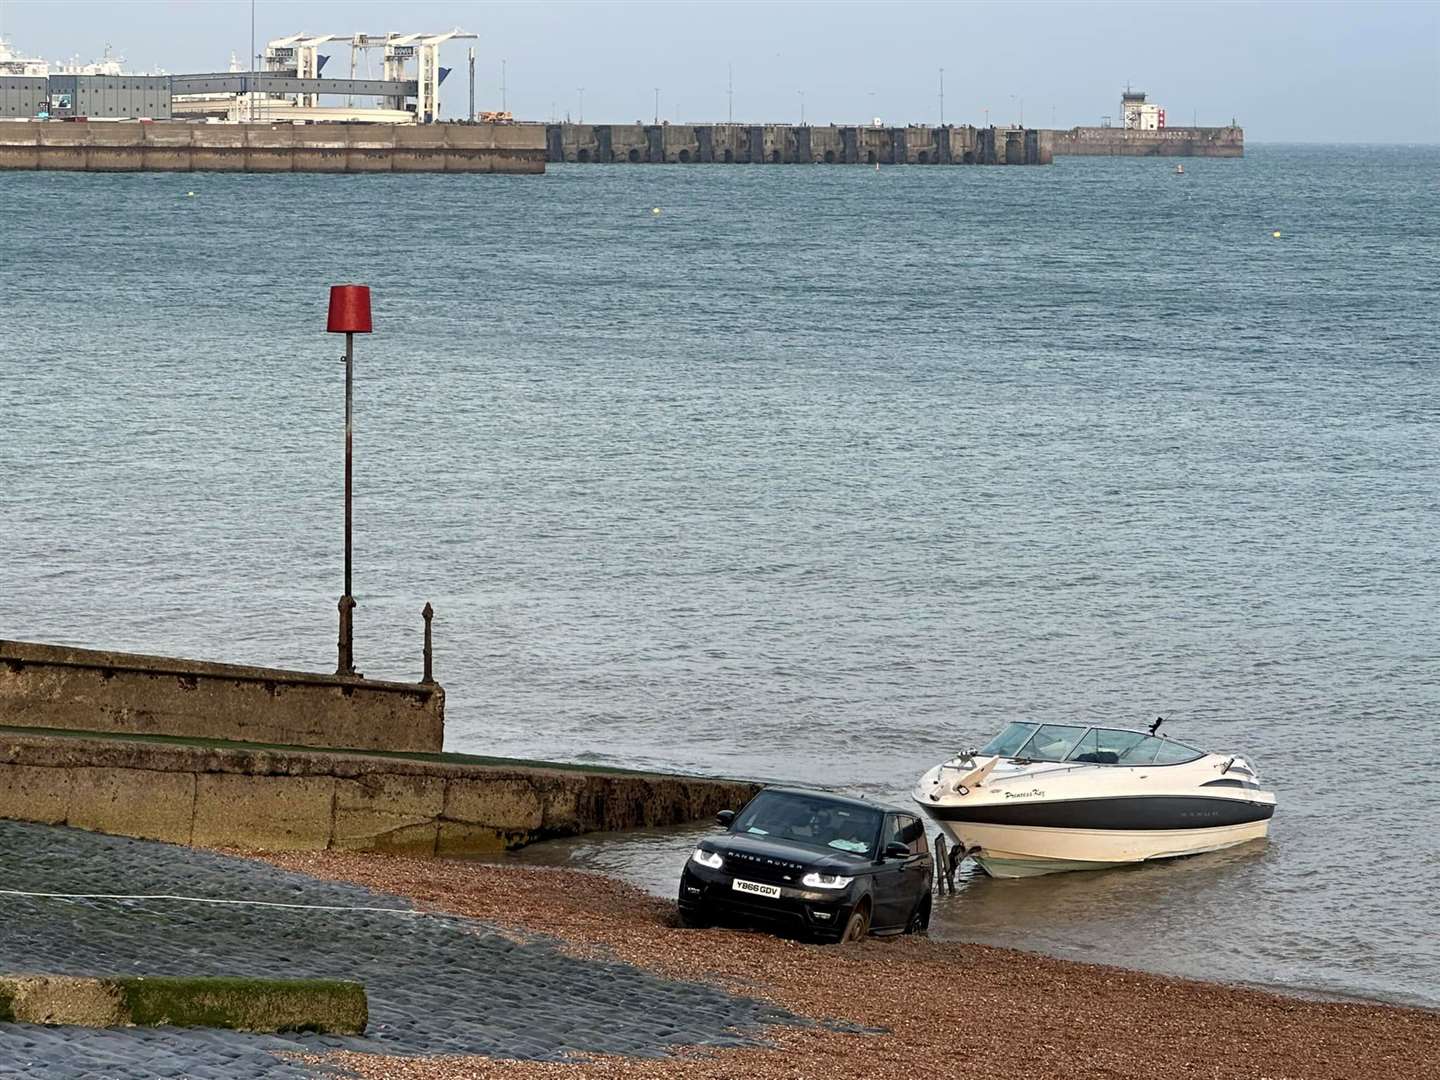 In attempting to tow a boat the Range Rover found itself trapped in the shingle on Dover beach